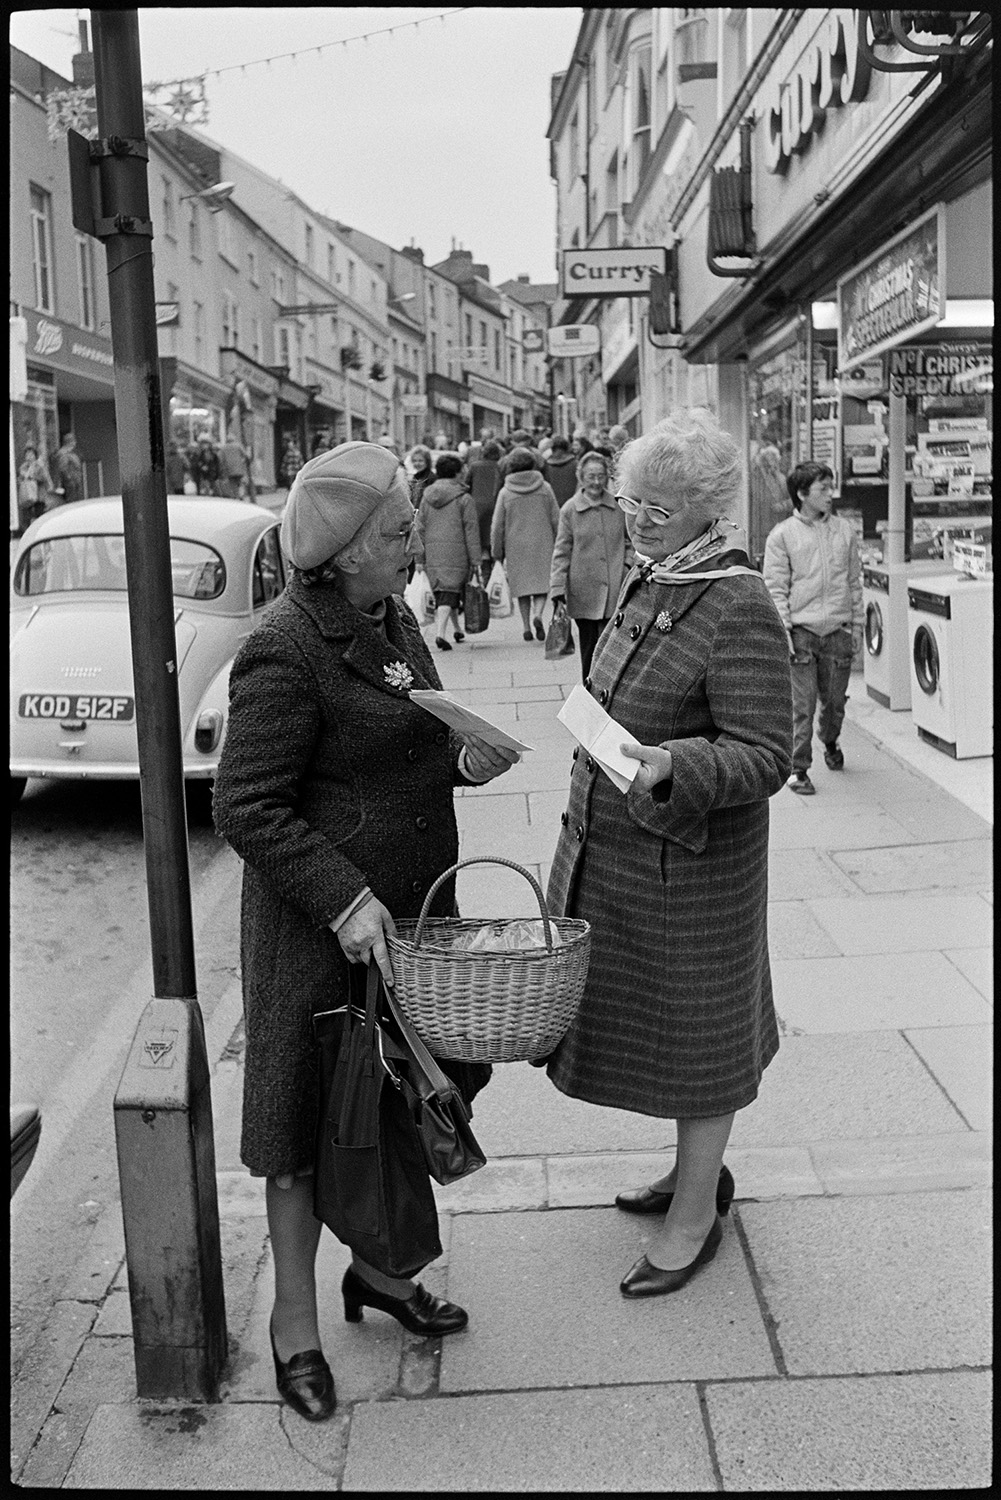 Town street scenes with women chatting holding shopping baskets. 
[Two women talking in Mill Street, Bideford. One of them is holding a basket. Other shoppers can be seen as well as shop fronts, including 'Currys'.]